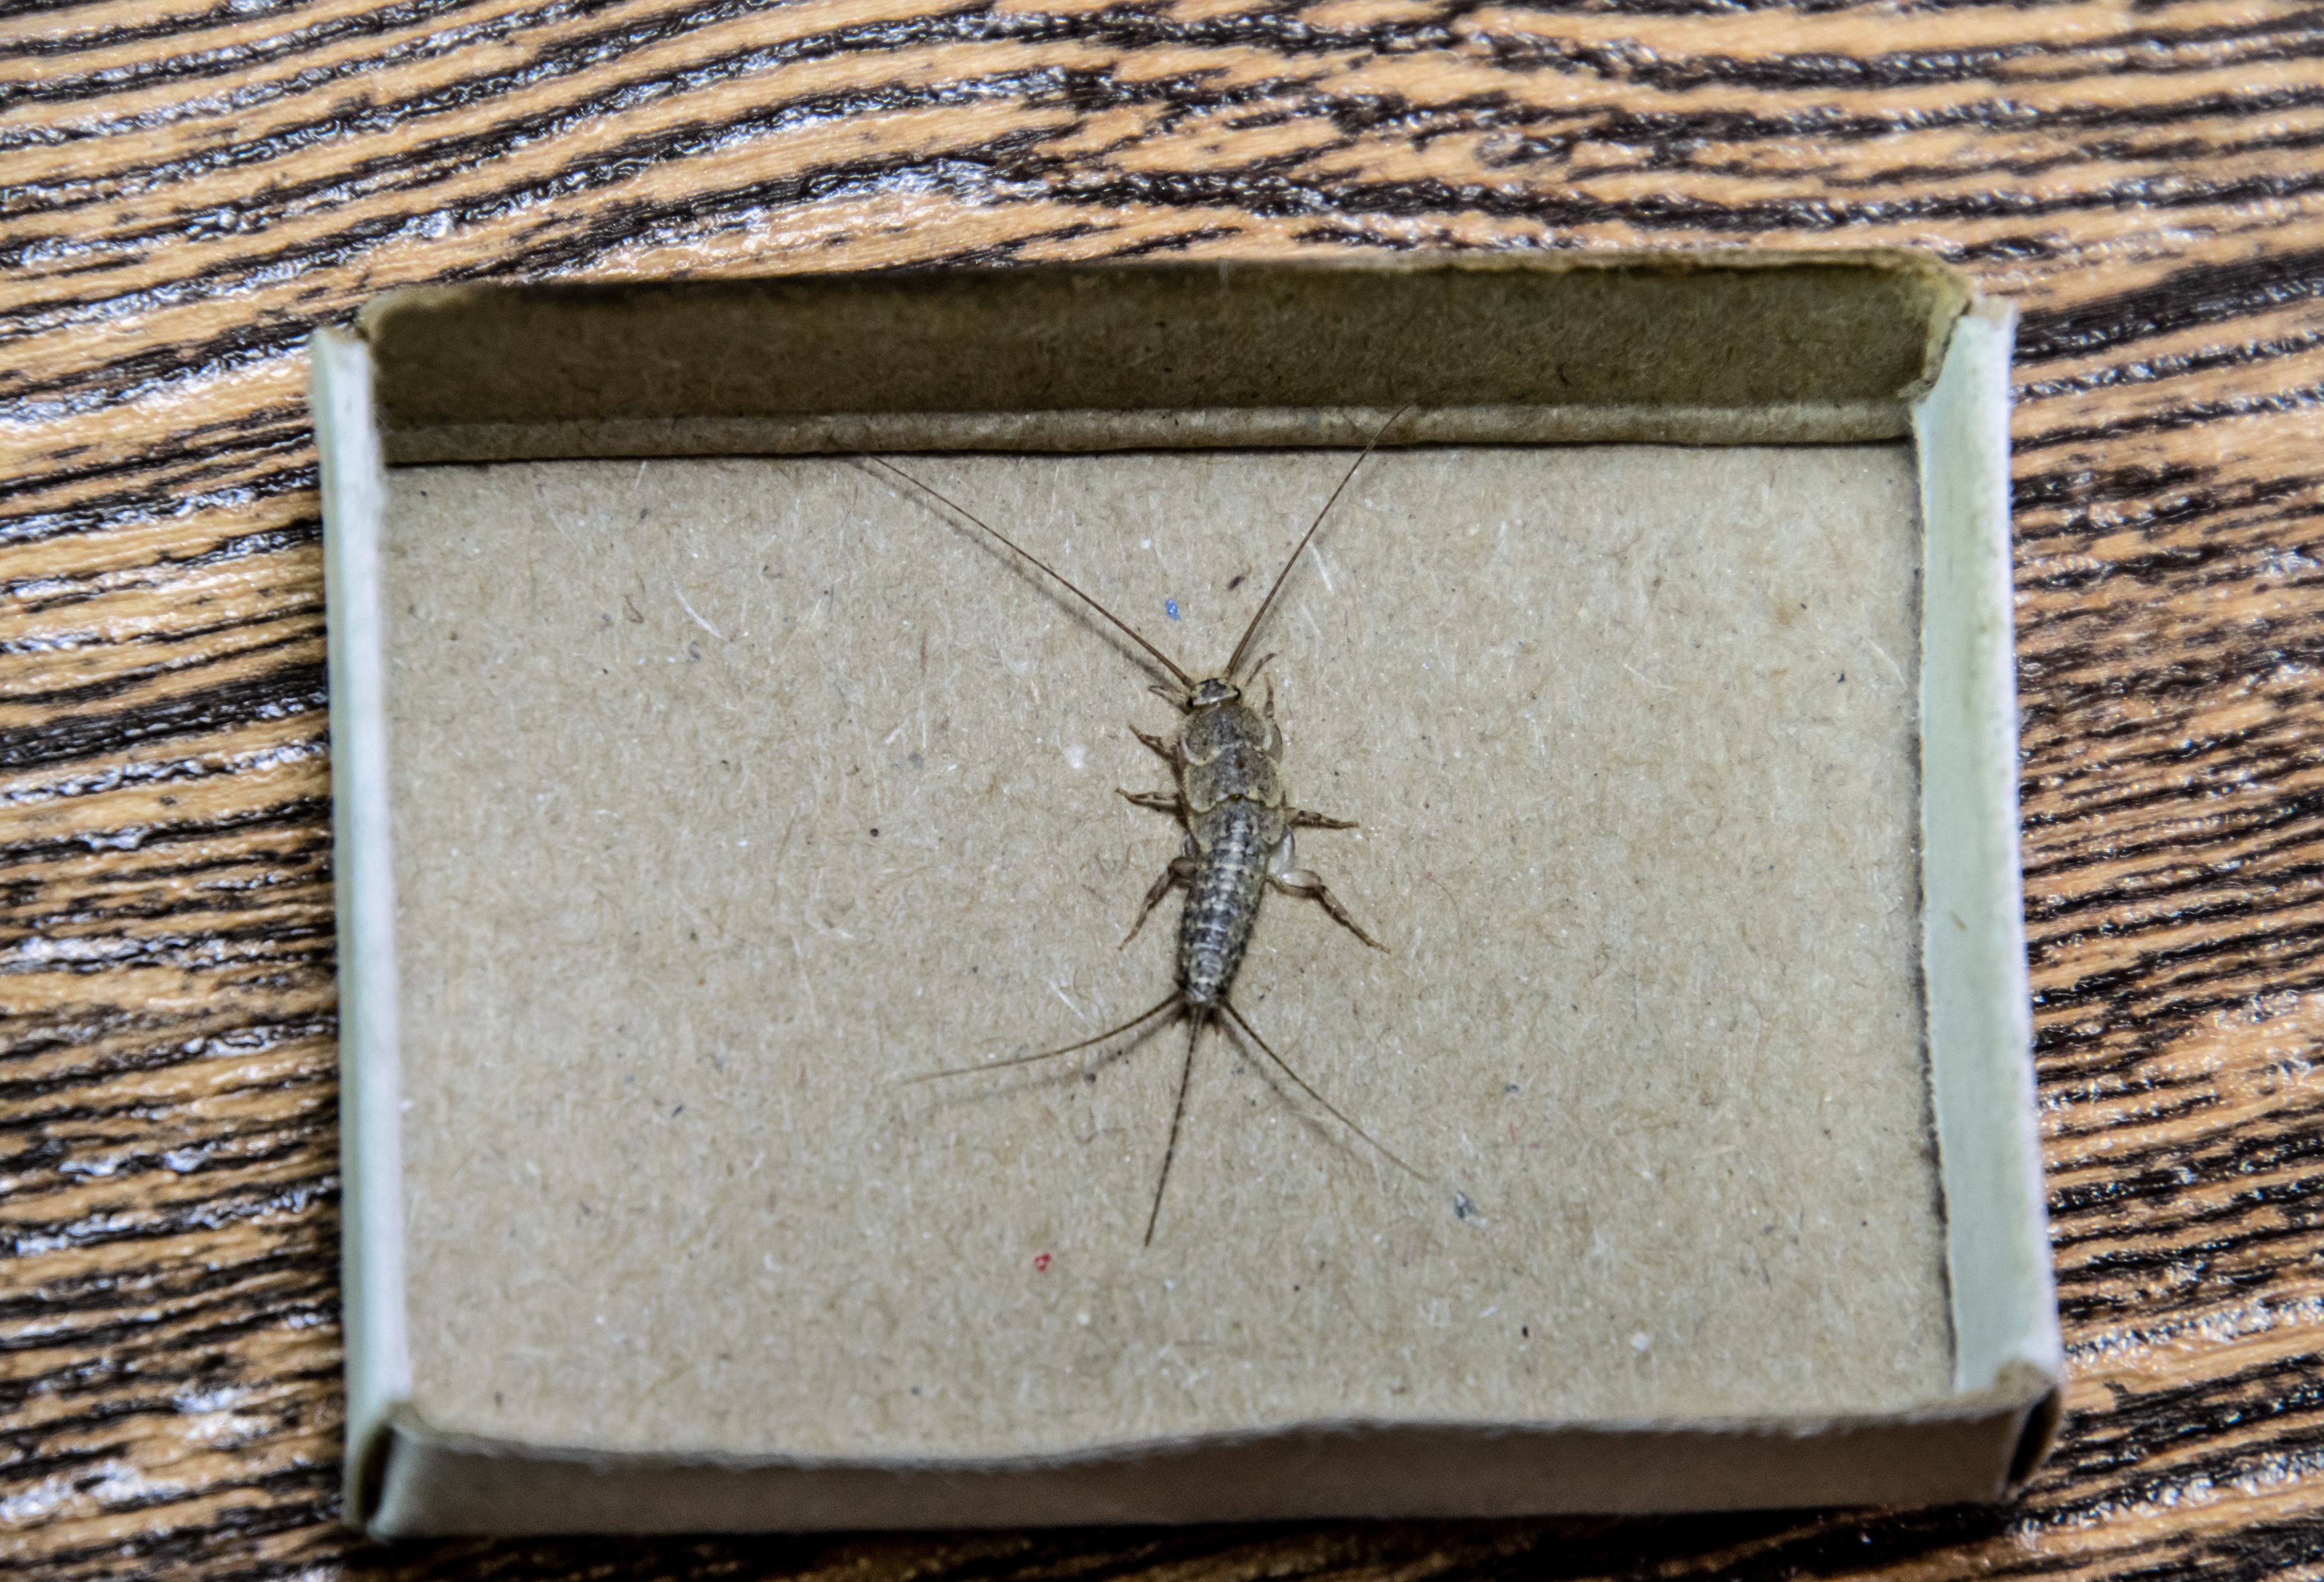 How To Get Rid of Silverfish - Get Rid of Silverfish Naturally